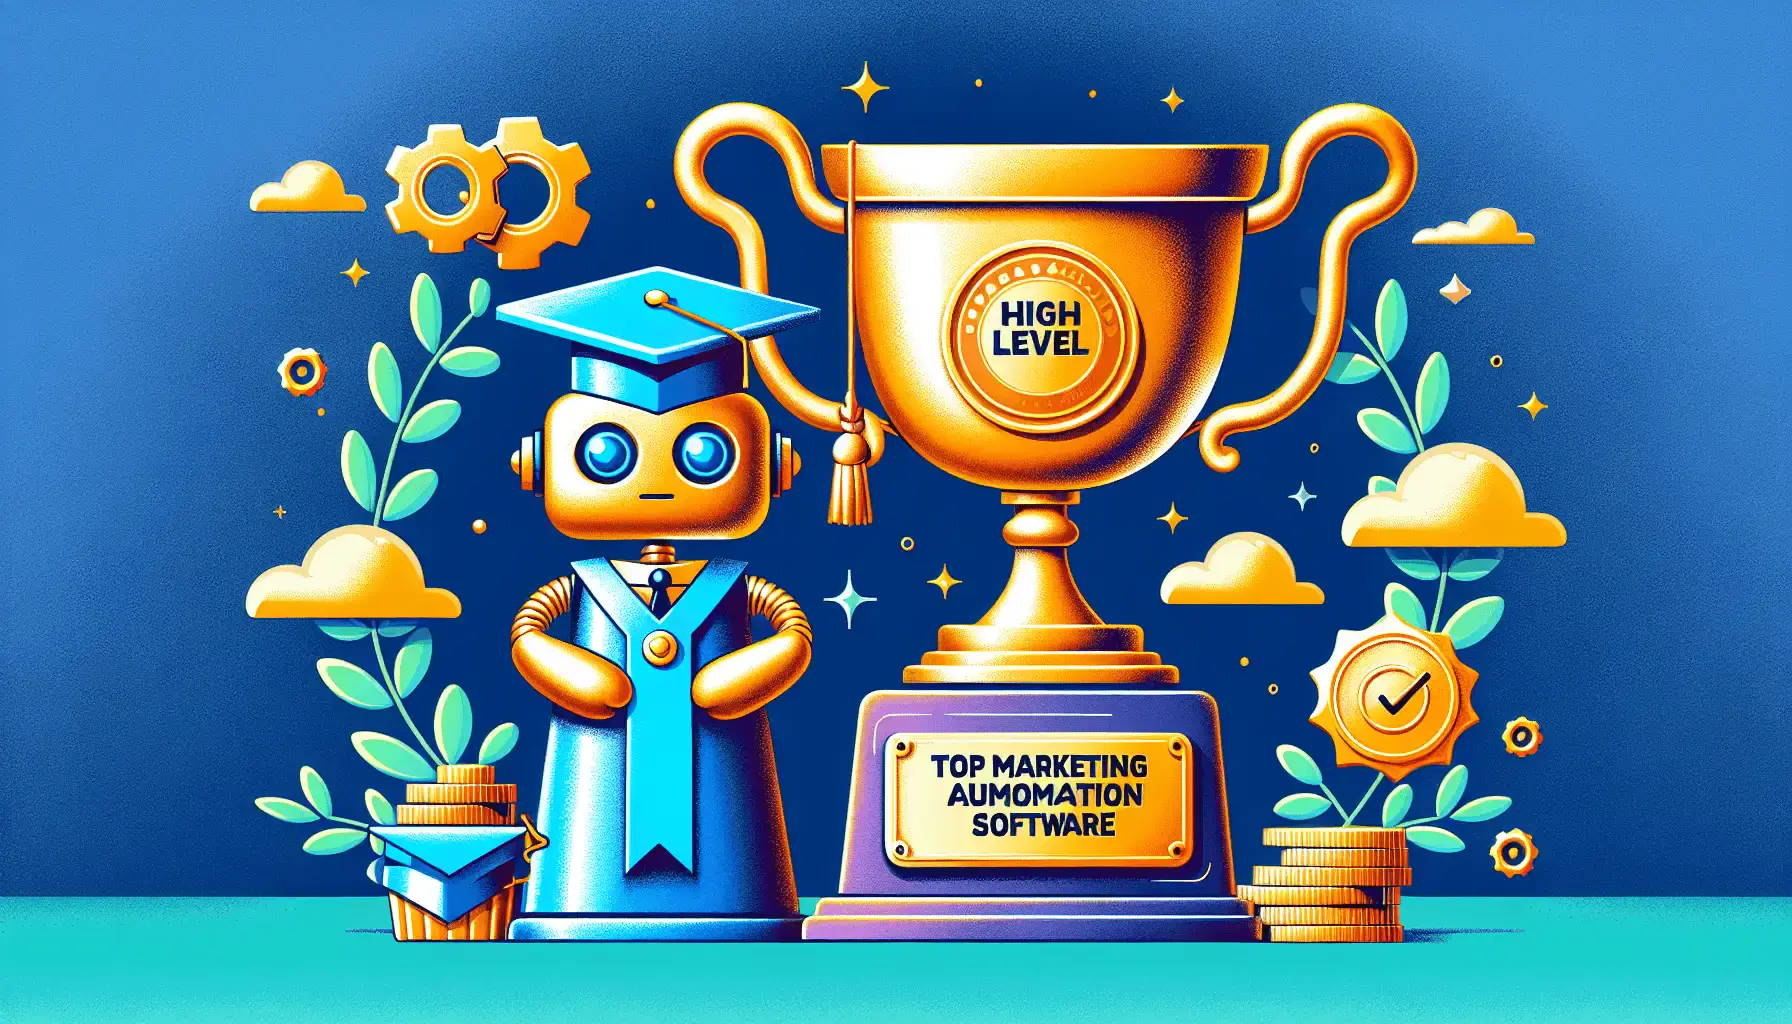 A golden trophy with the words Top Marketing Automation Software engraved on it, with a robot wearing a graduation cap holding up a banner that reads HighLevel next to the trophy.